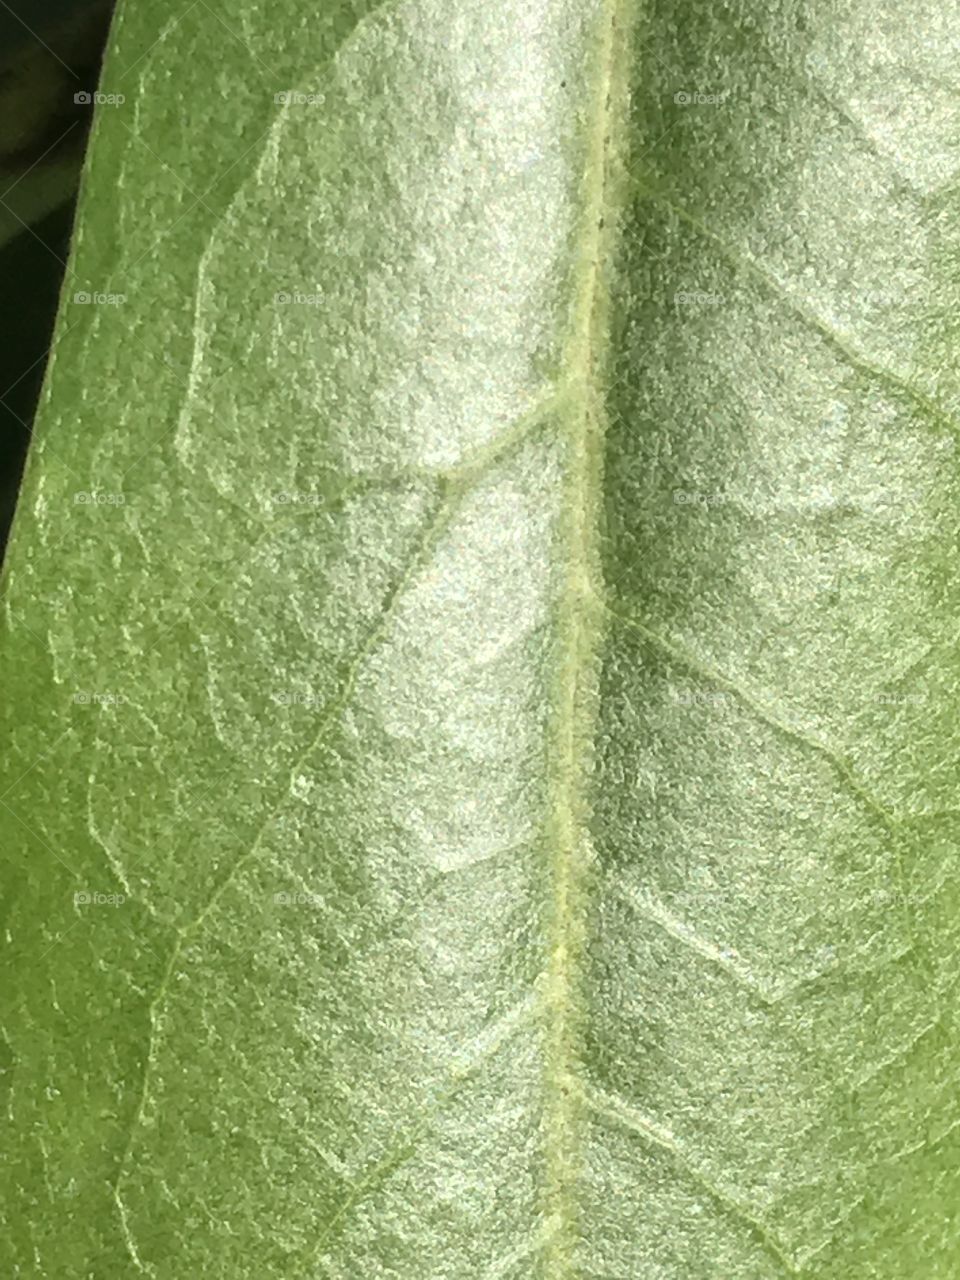 Rhododendron leaf